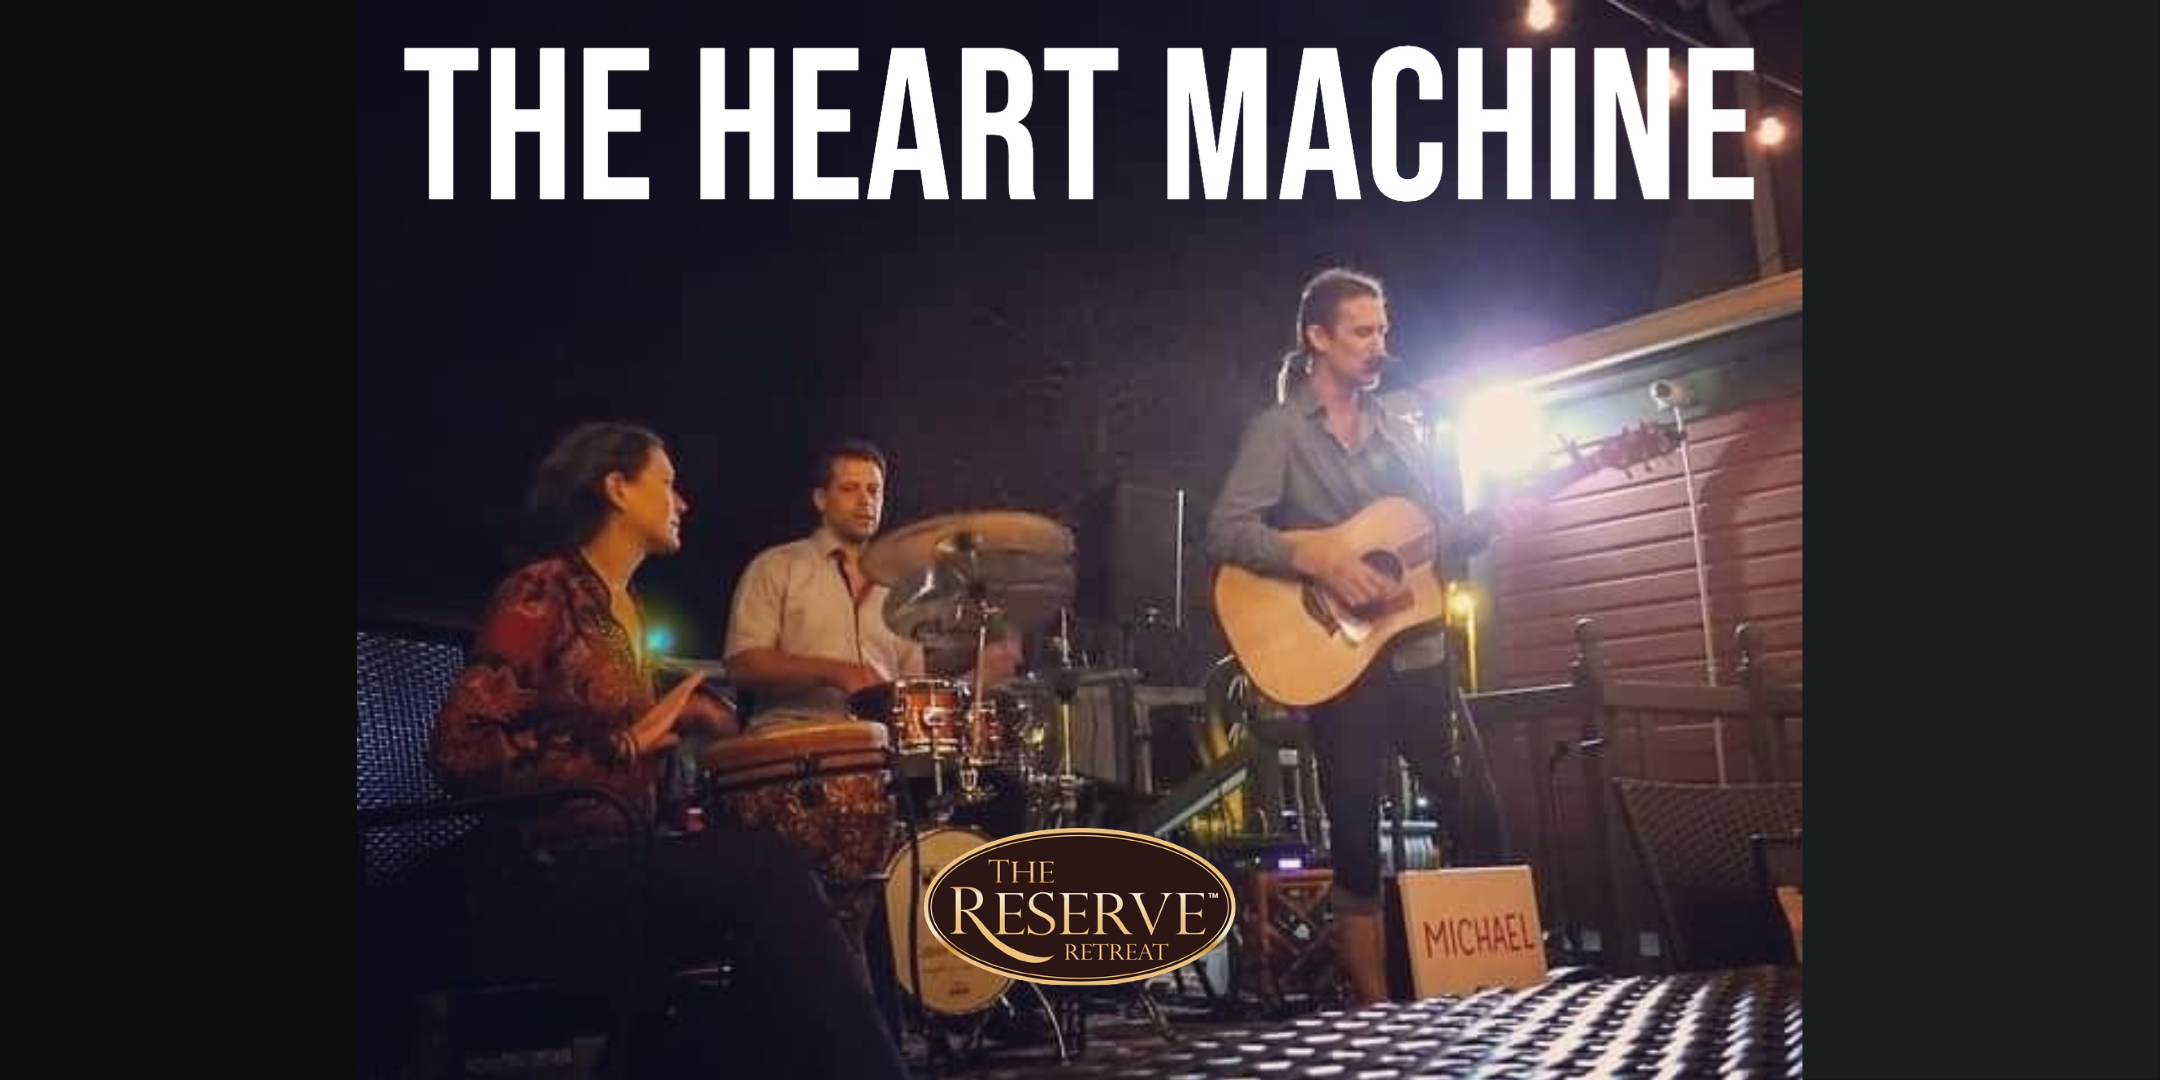 the heart machine live at the reserve retreat on wednesday, december 8, from 7:30-9:30p